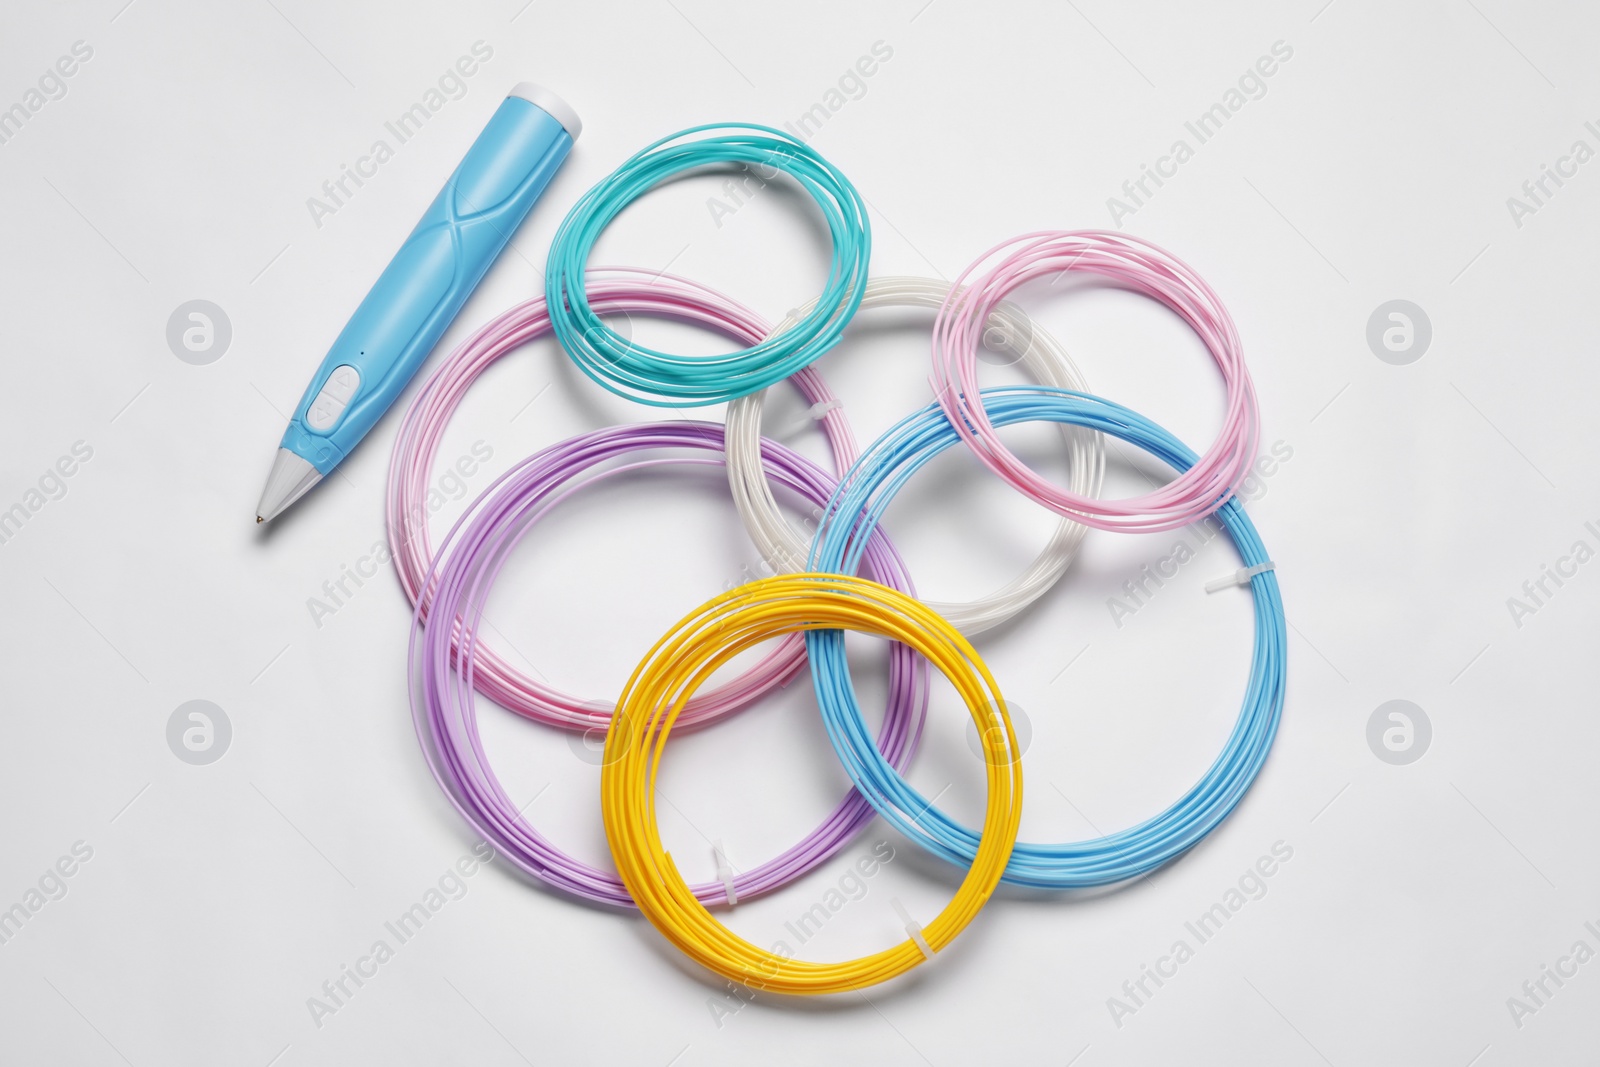 Photo of Stylish 3D pen and colorful plastic filaments on white background, flat lay